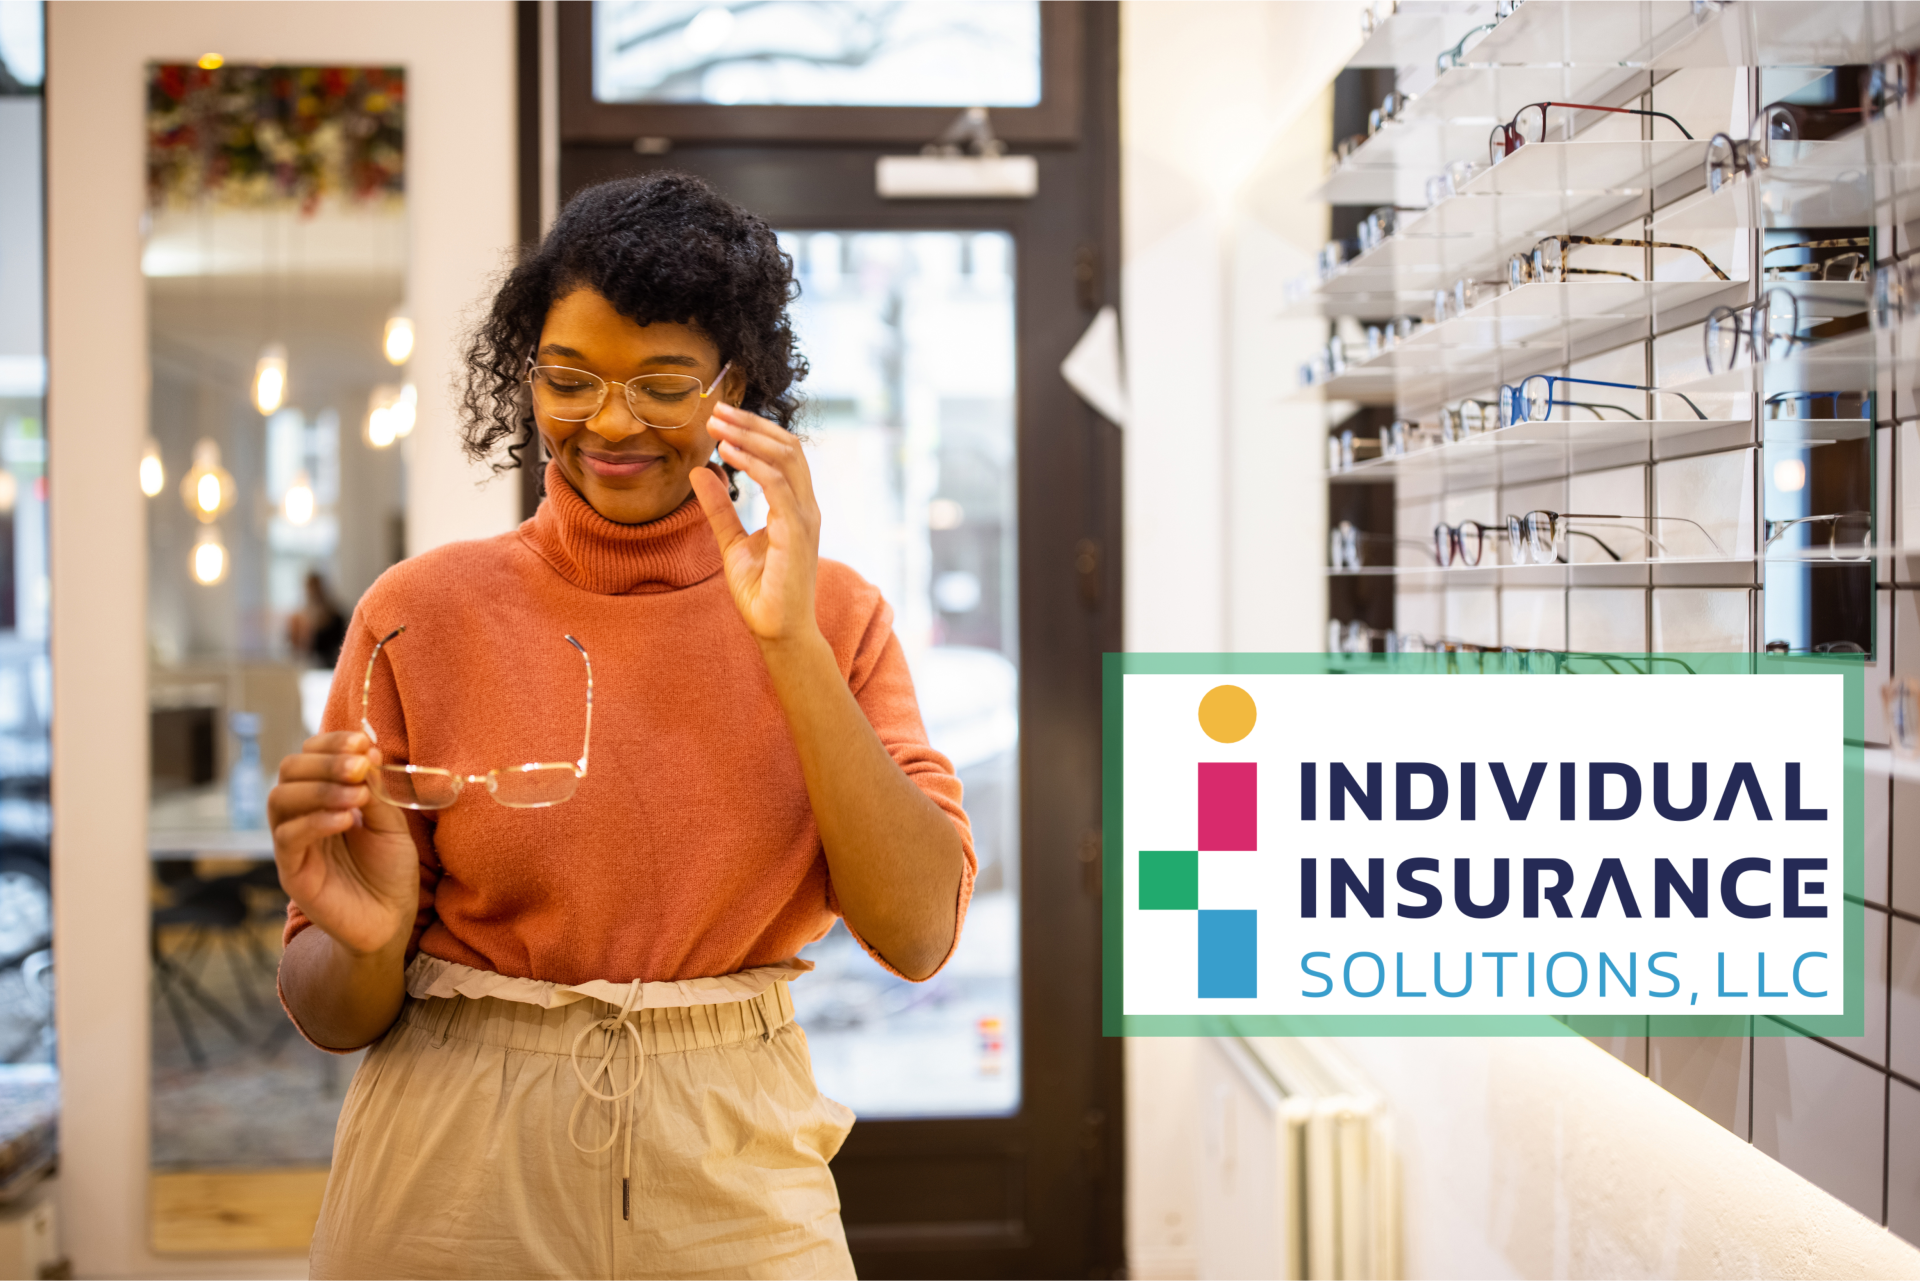 woman shopping for glasses with partner IIS logo